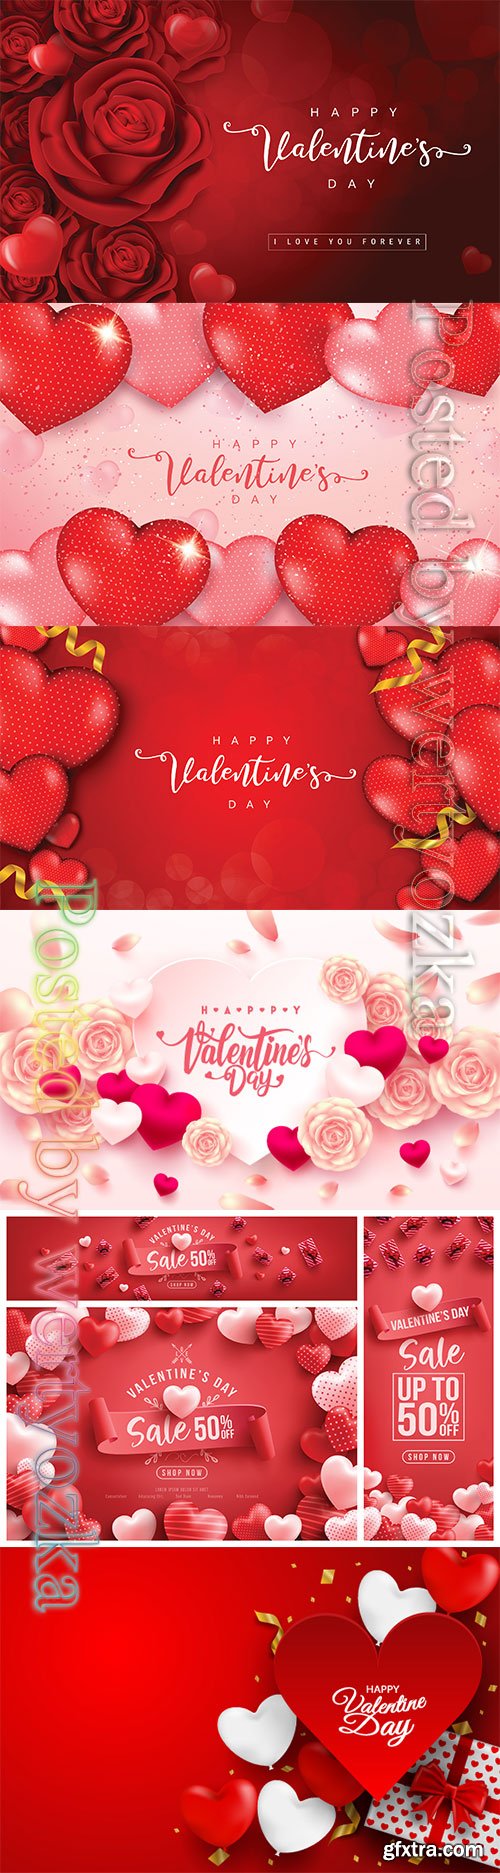 Background for Love and Valentine's day